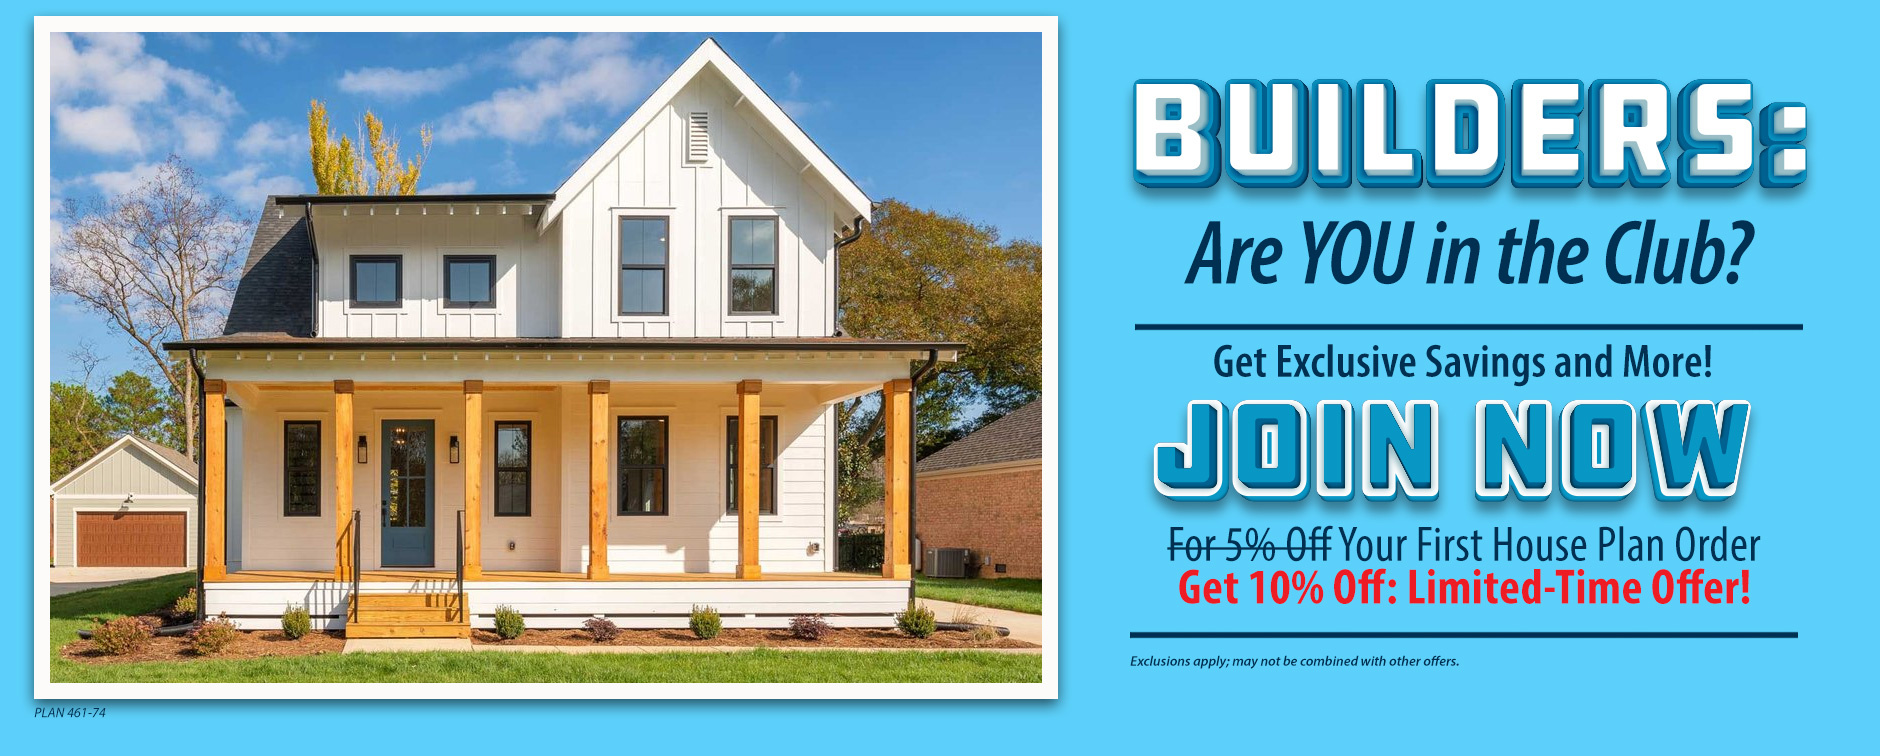 Builders: Enjoy 10% Off floor plans when you sign up for our club